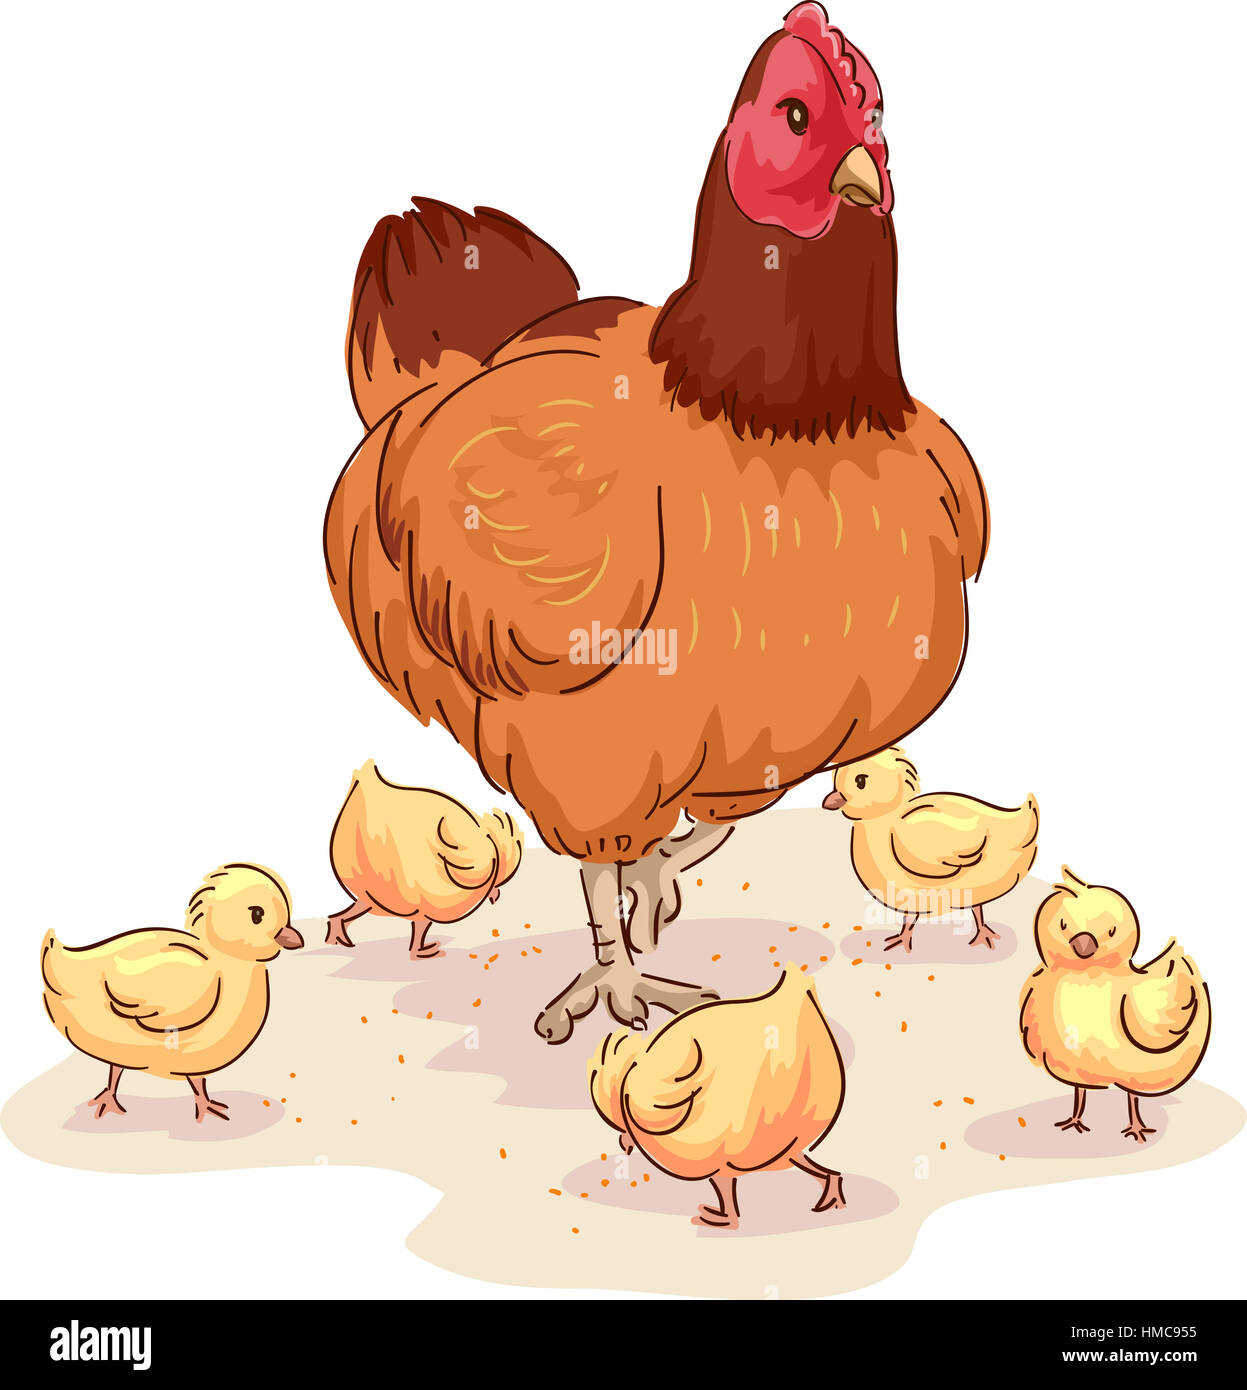 https://c8.alamy.com/comp/HMC955/animal-illustration-of-a-mother-hen-looking-after-her-chicks-while-HMC955.jpg